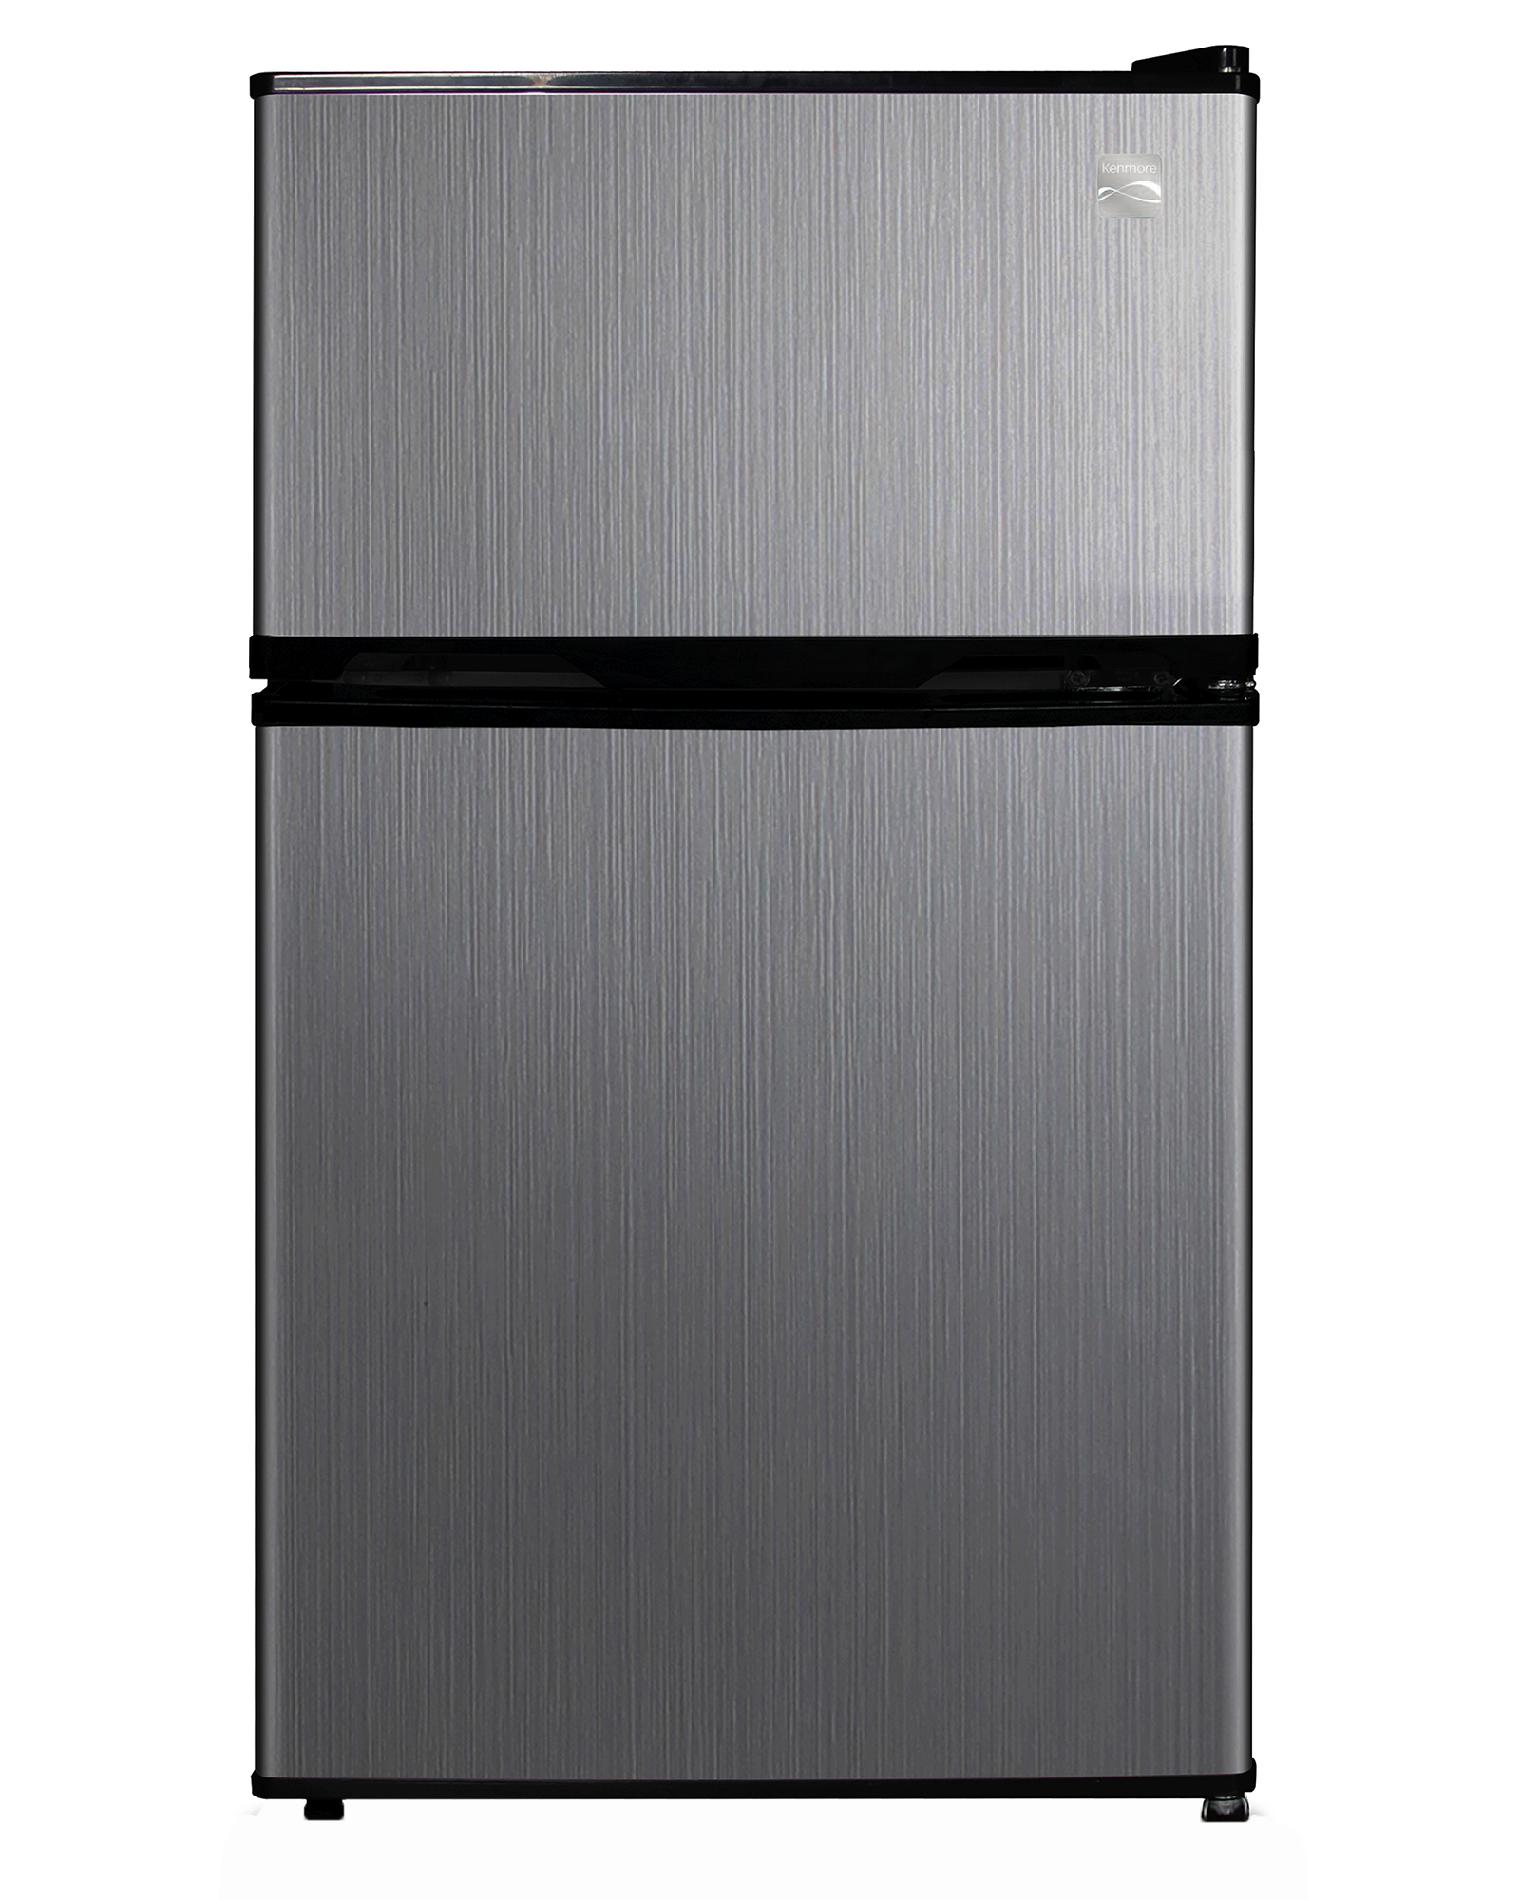 0814982016610 - 99763 3.1 CU. FT. COMPACT REFRIGERATOR - STAINLESS